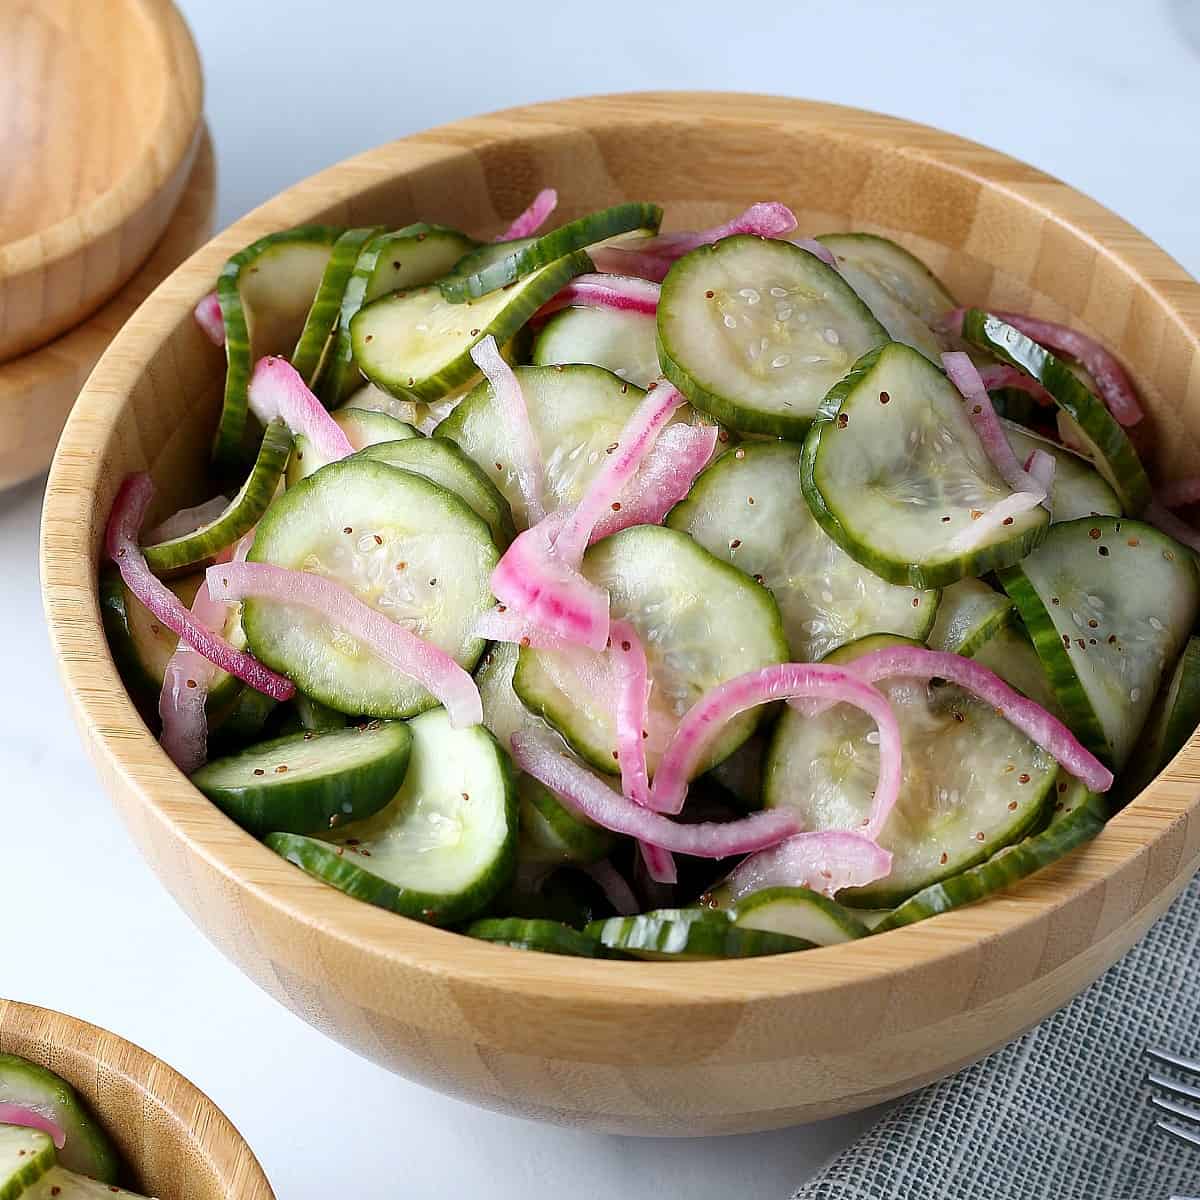 A large wooden bowl is tilted forward and filled with cucumber vinegar salad tharhas green cucumber slices and thinly sliced red onions.